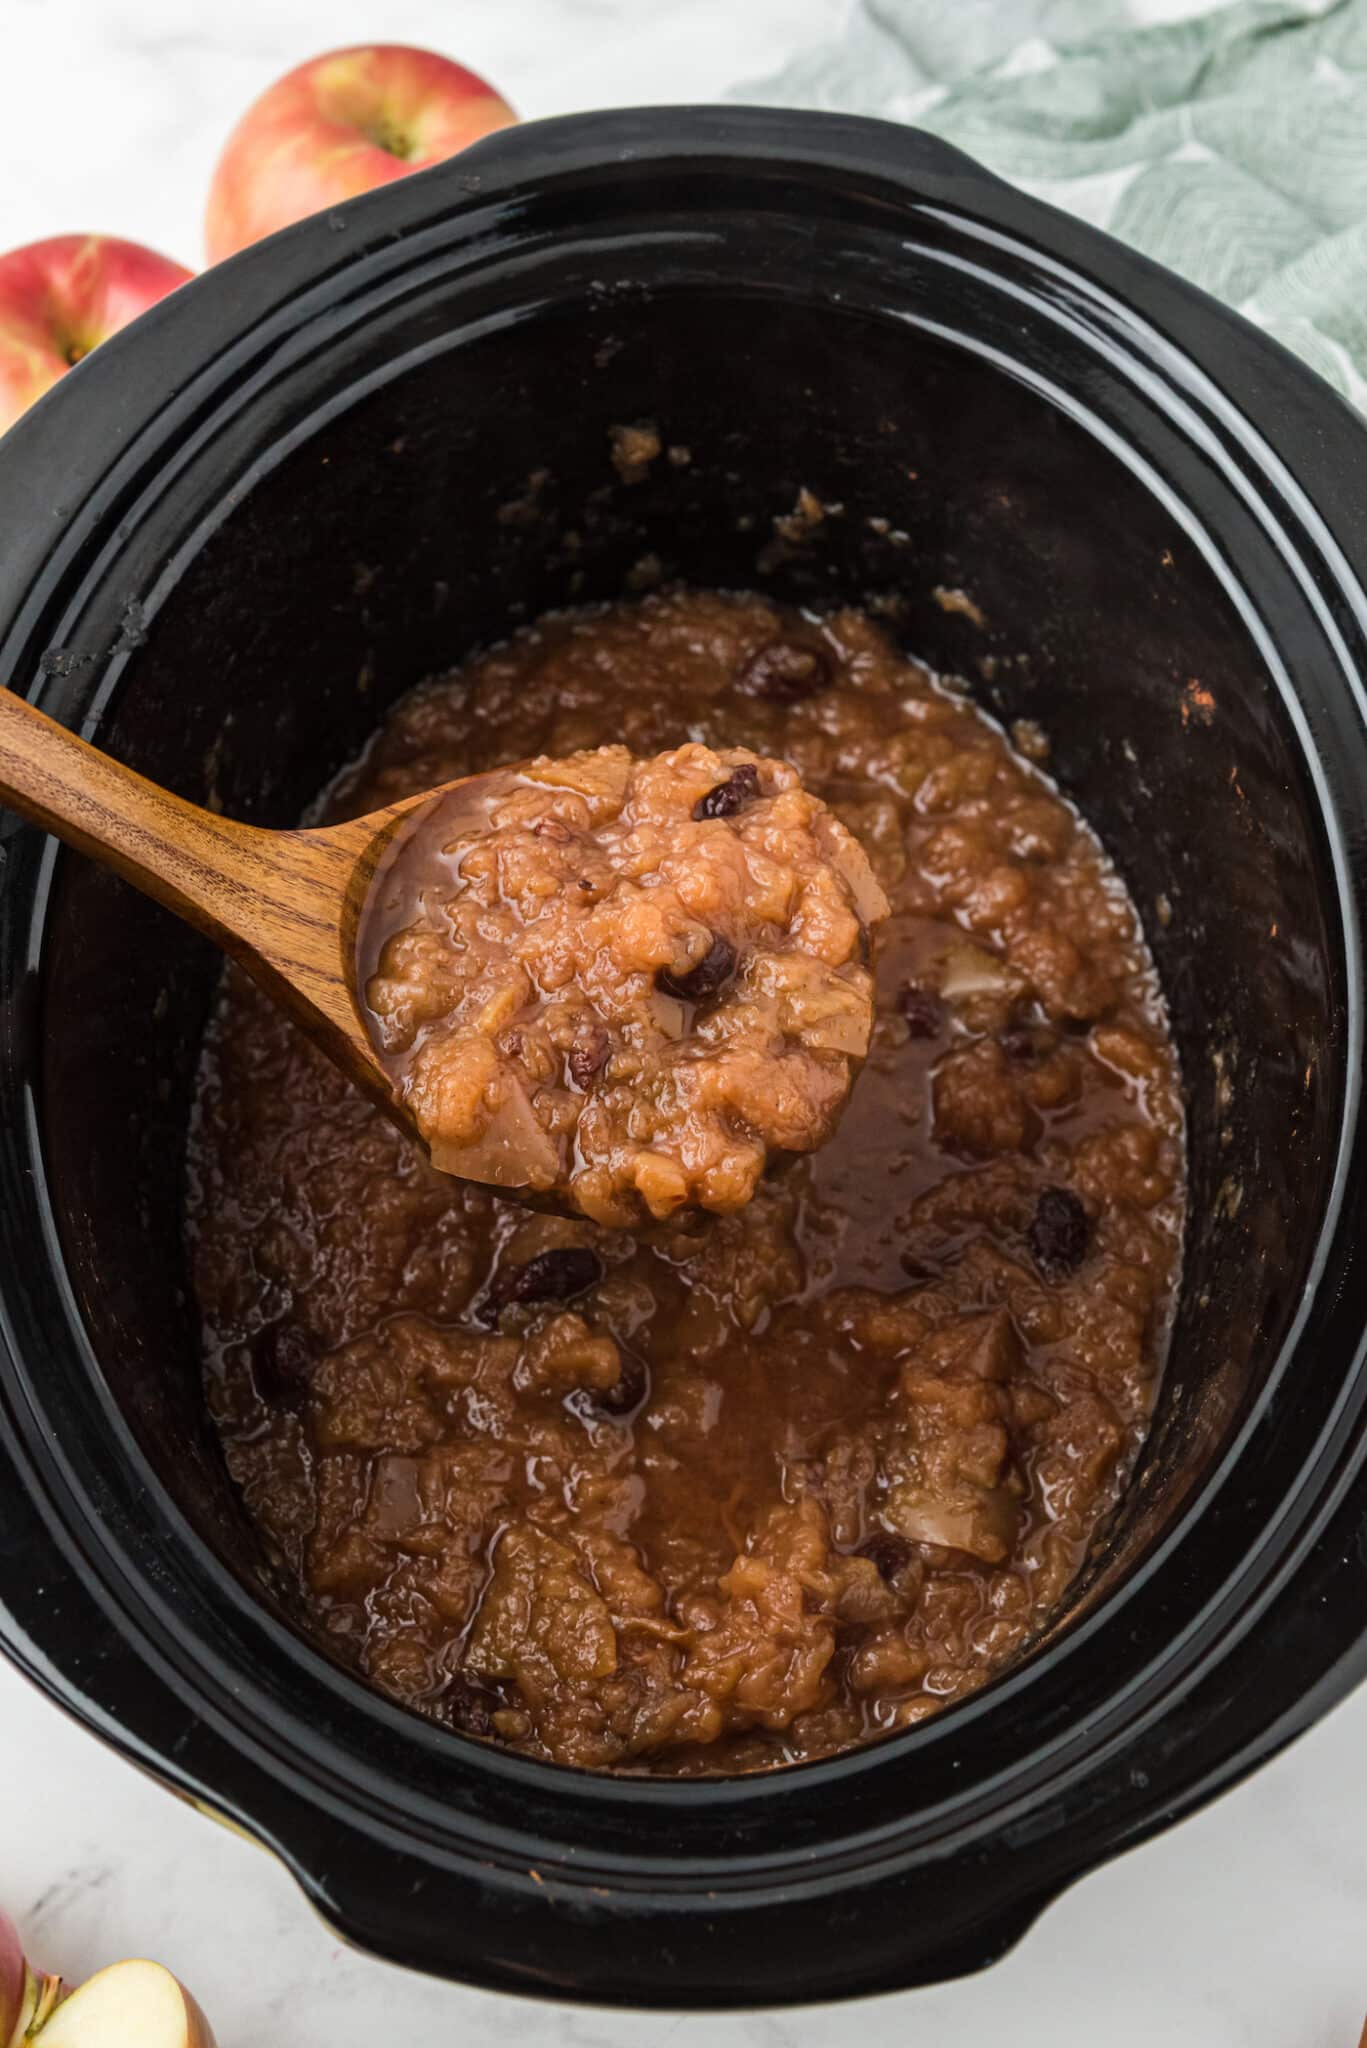 cooked applesauce in the crockpot ready to serve.